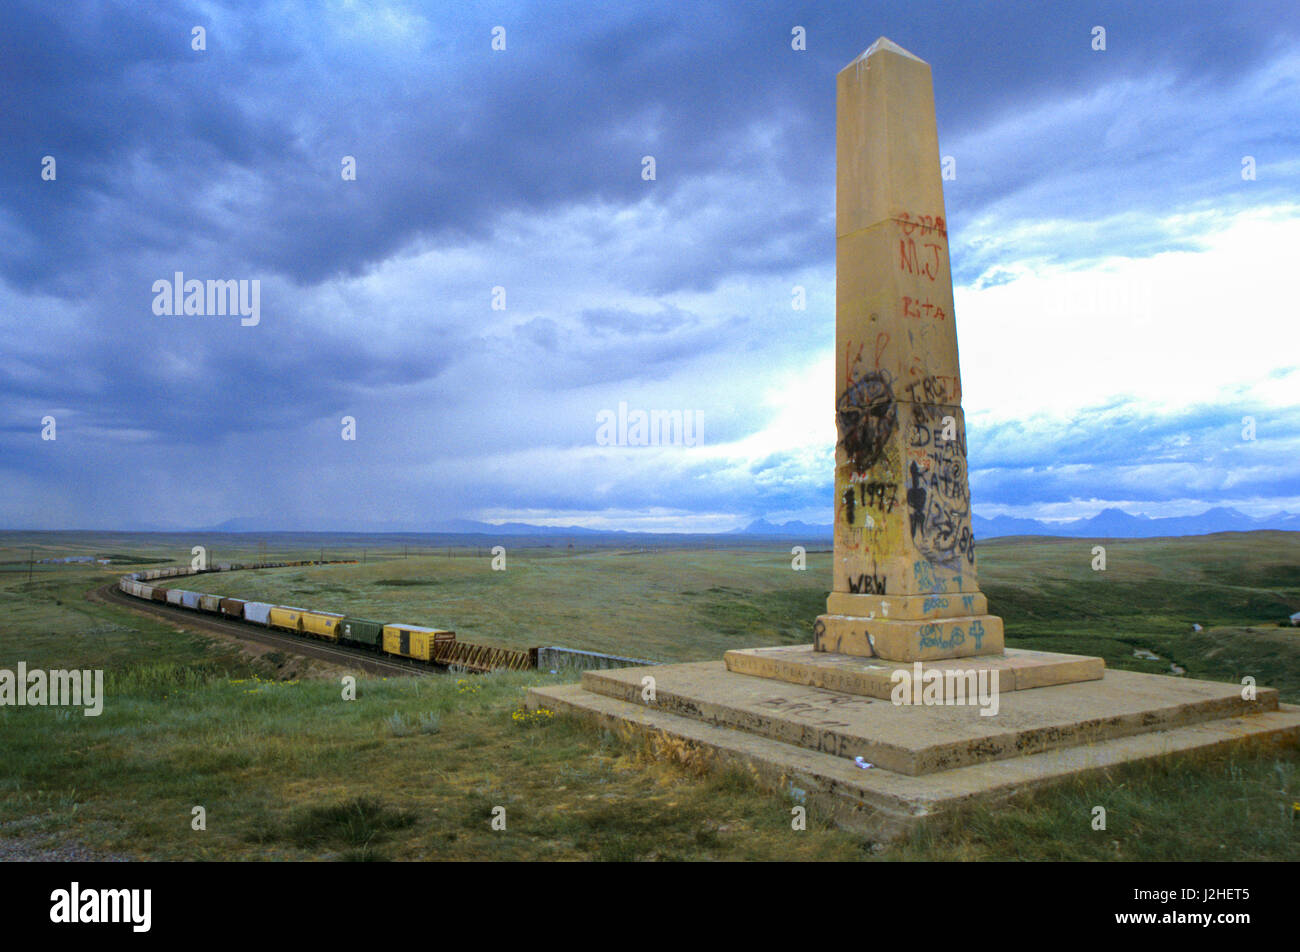 Union Pacific Lewis and Clark monument on Blackfeet Reservation in Browning Montana overlooks train and tracks Stock Photo